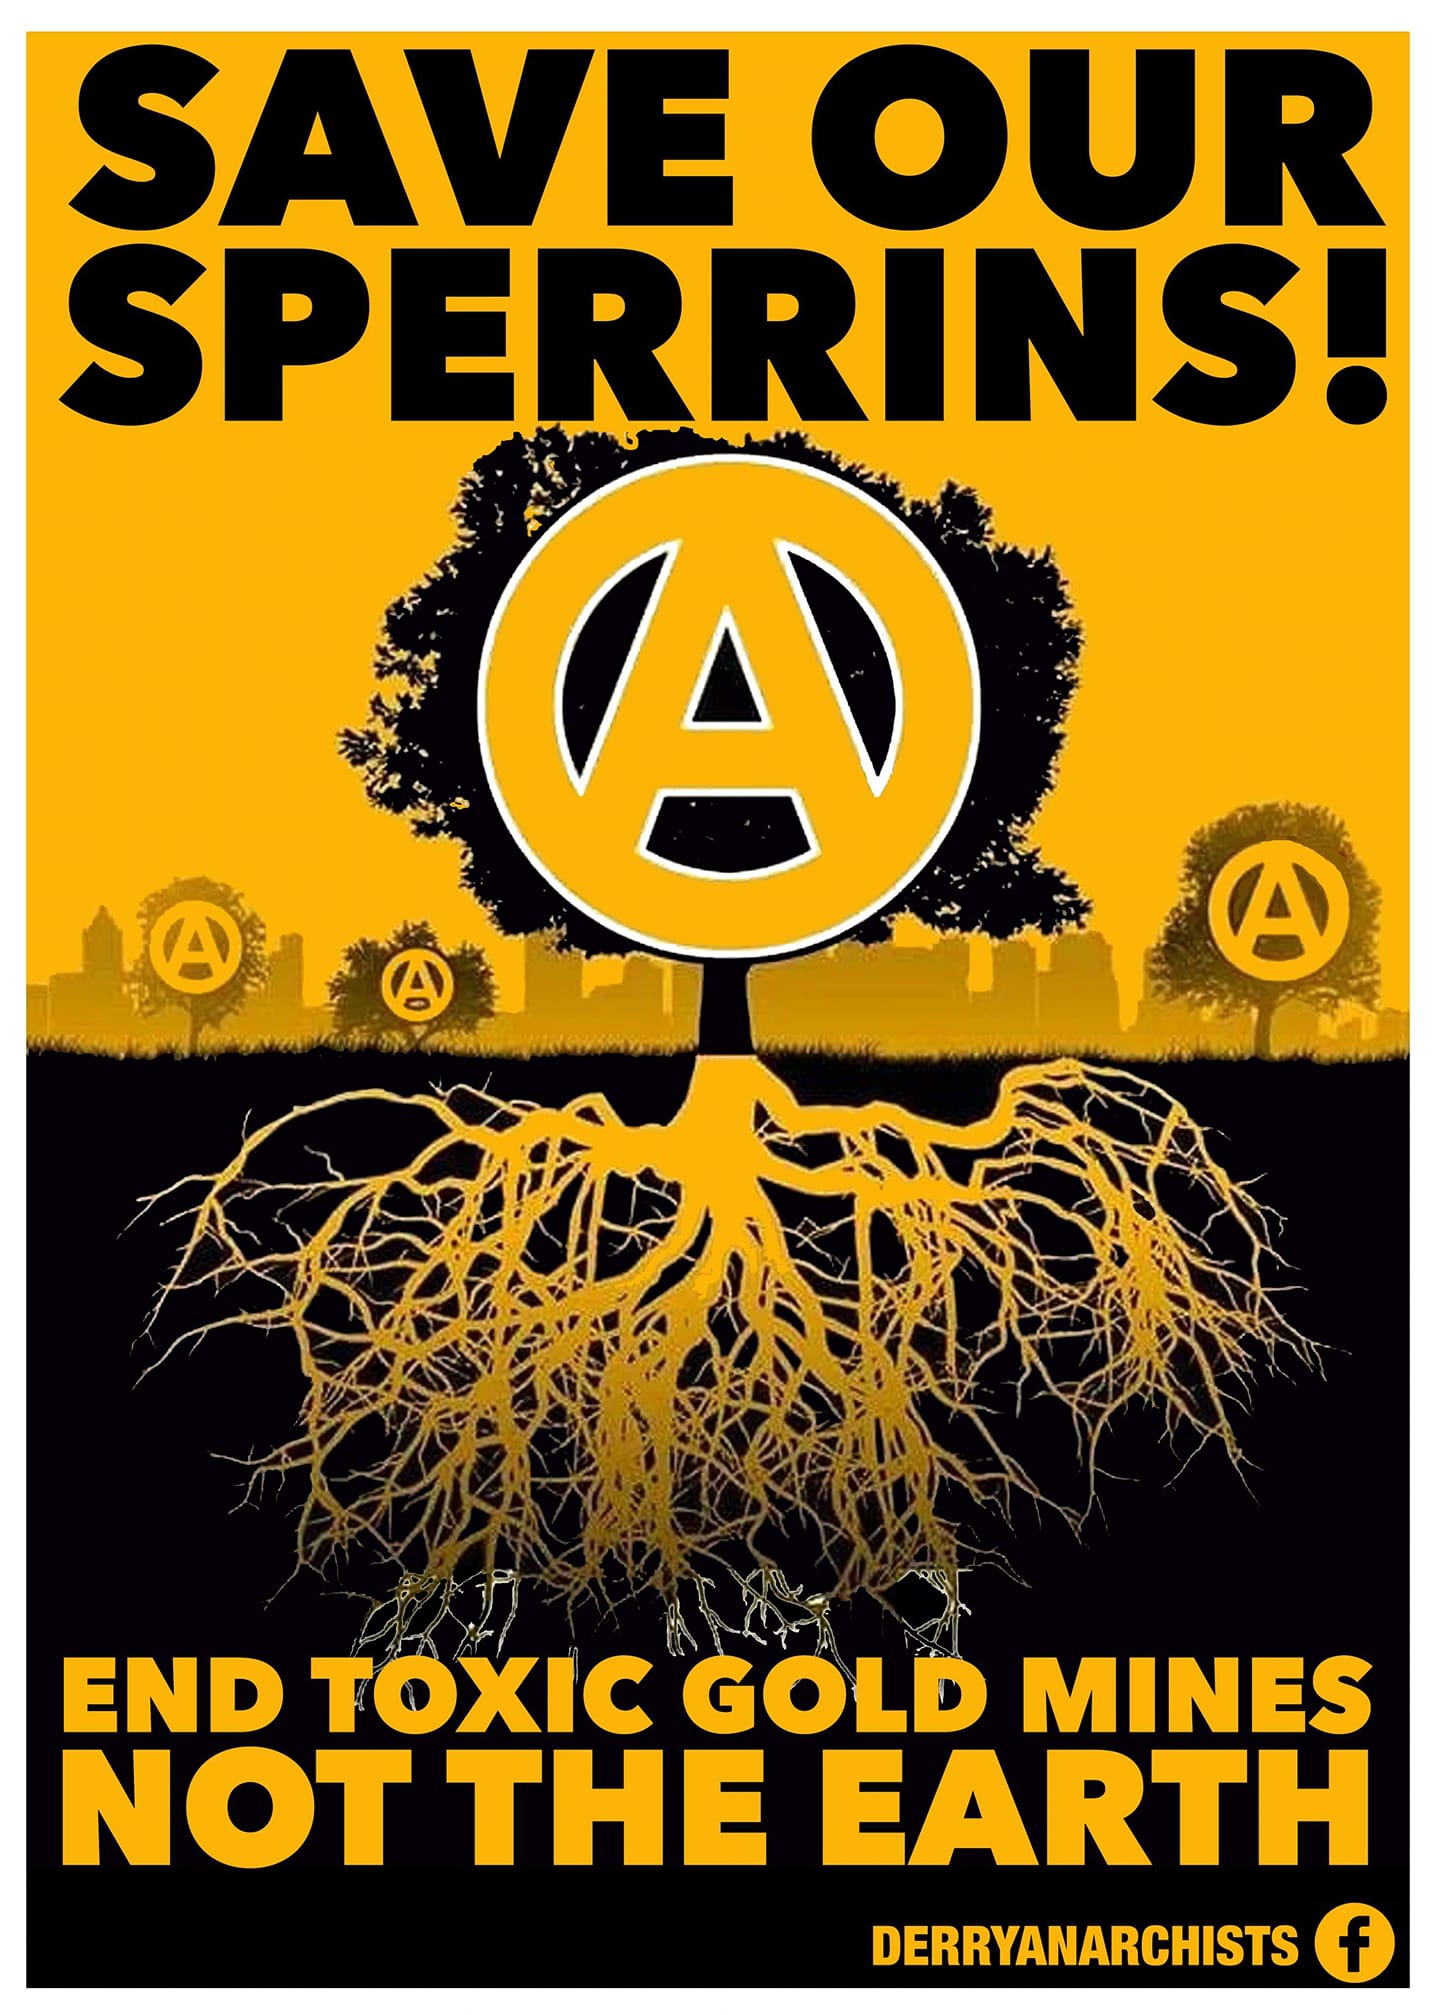 Image says 'Save our Sperrins', end toxic gold mines not the earth